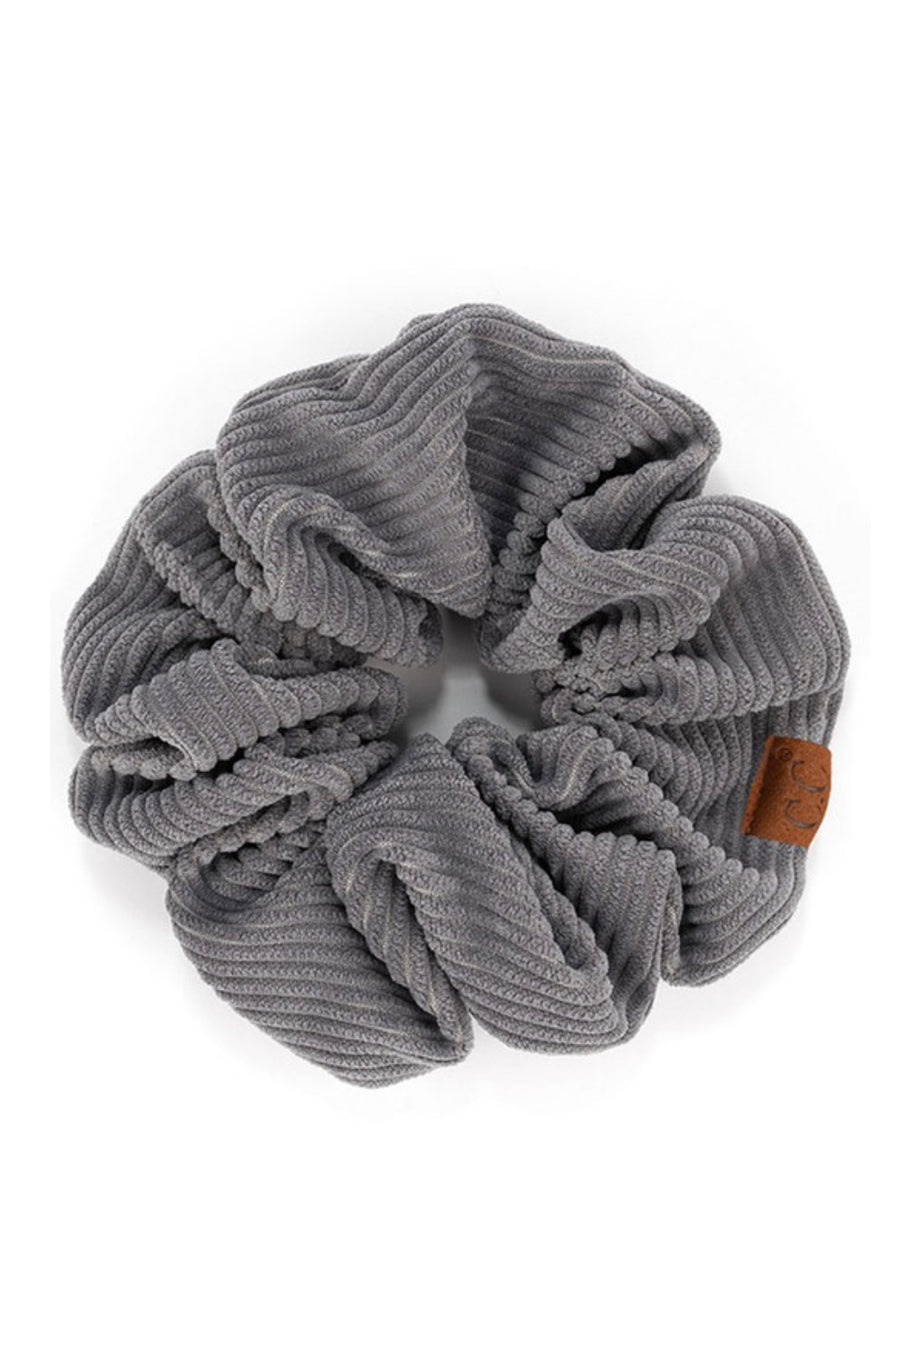 CC Corduroy Soft Scrunchies available in 8 colors